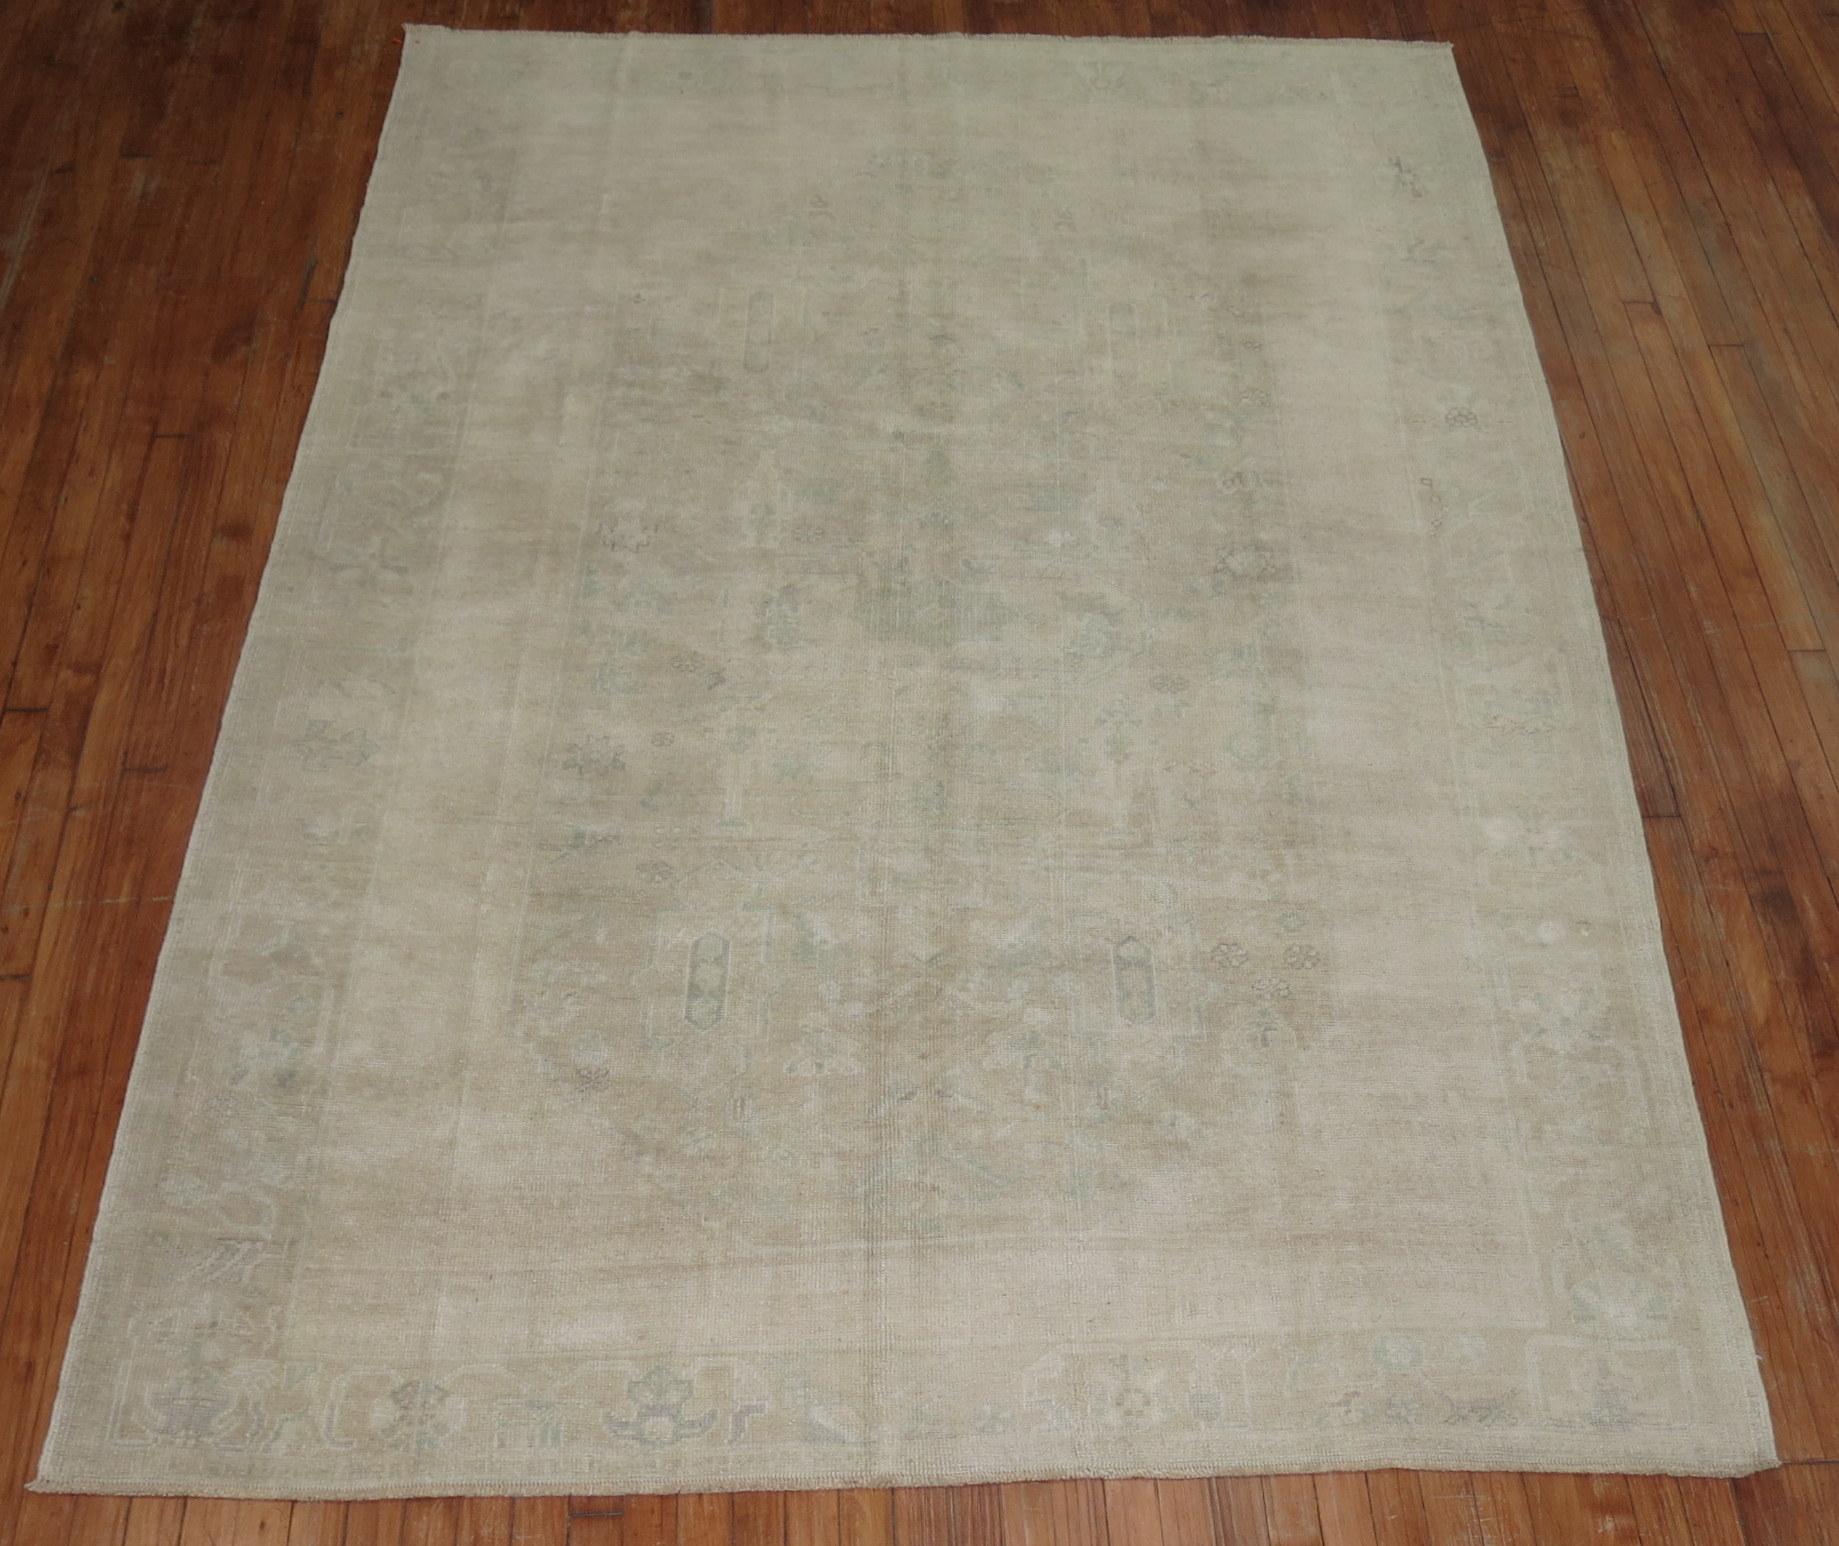 MId 20th century Neutral Color Turkish Oushak rug

Measures: 6'3'' x 8'9''.